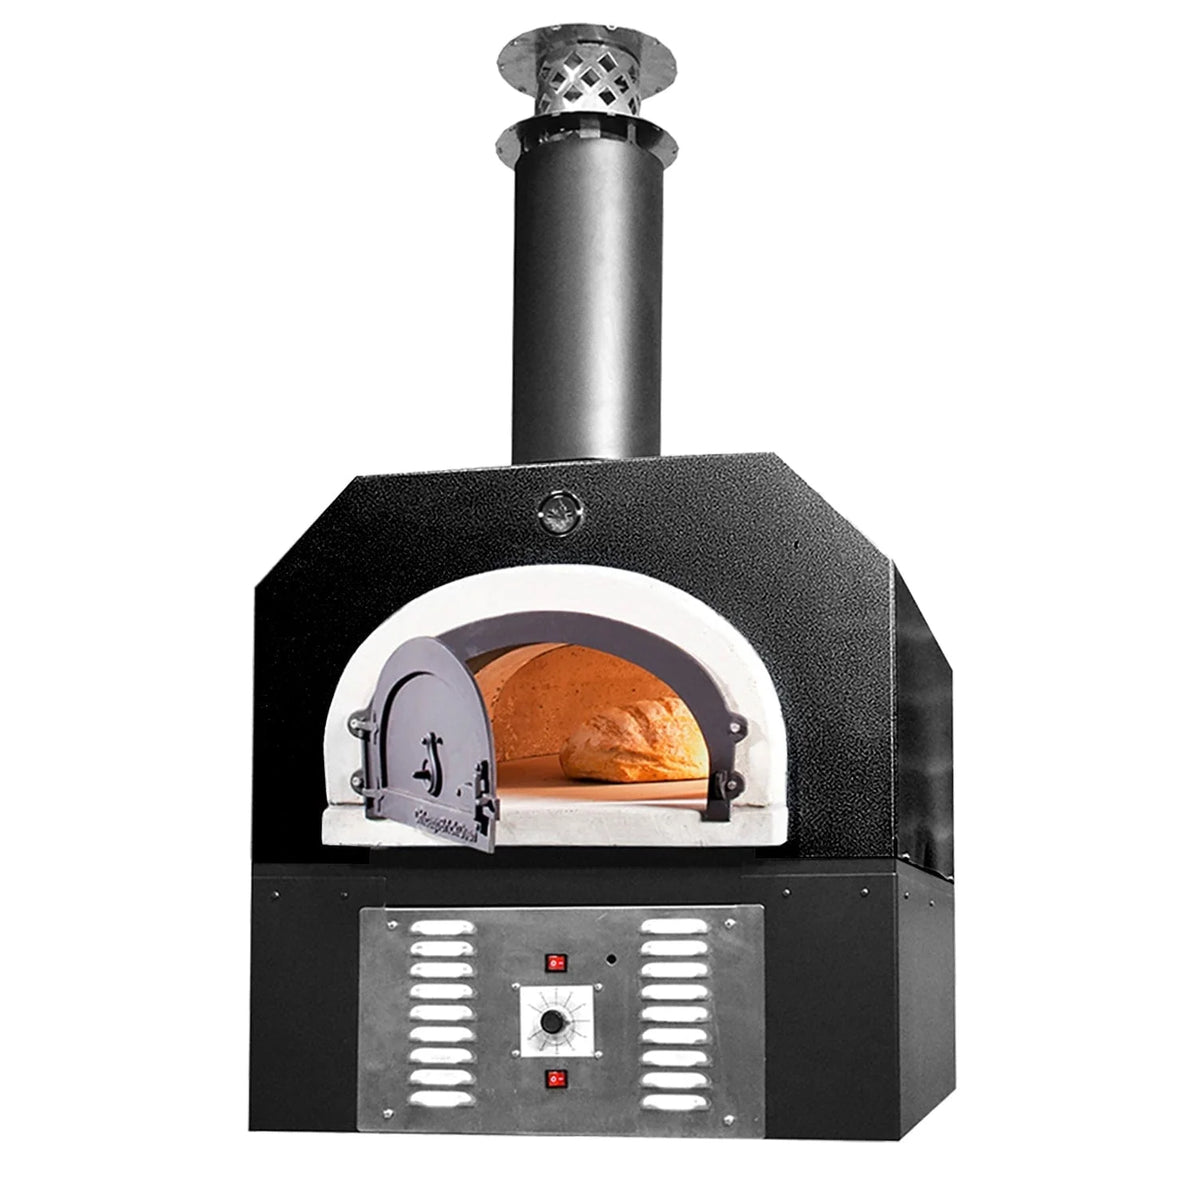 Chicago Brick Oven 35 1/2 Inch Hybrid Commercial Countertop Pizza Oven w/ Skirt